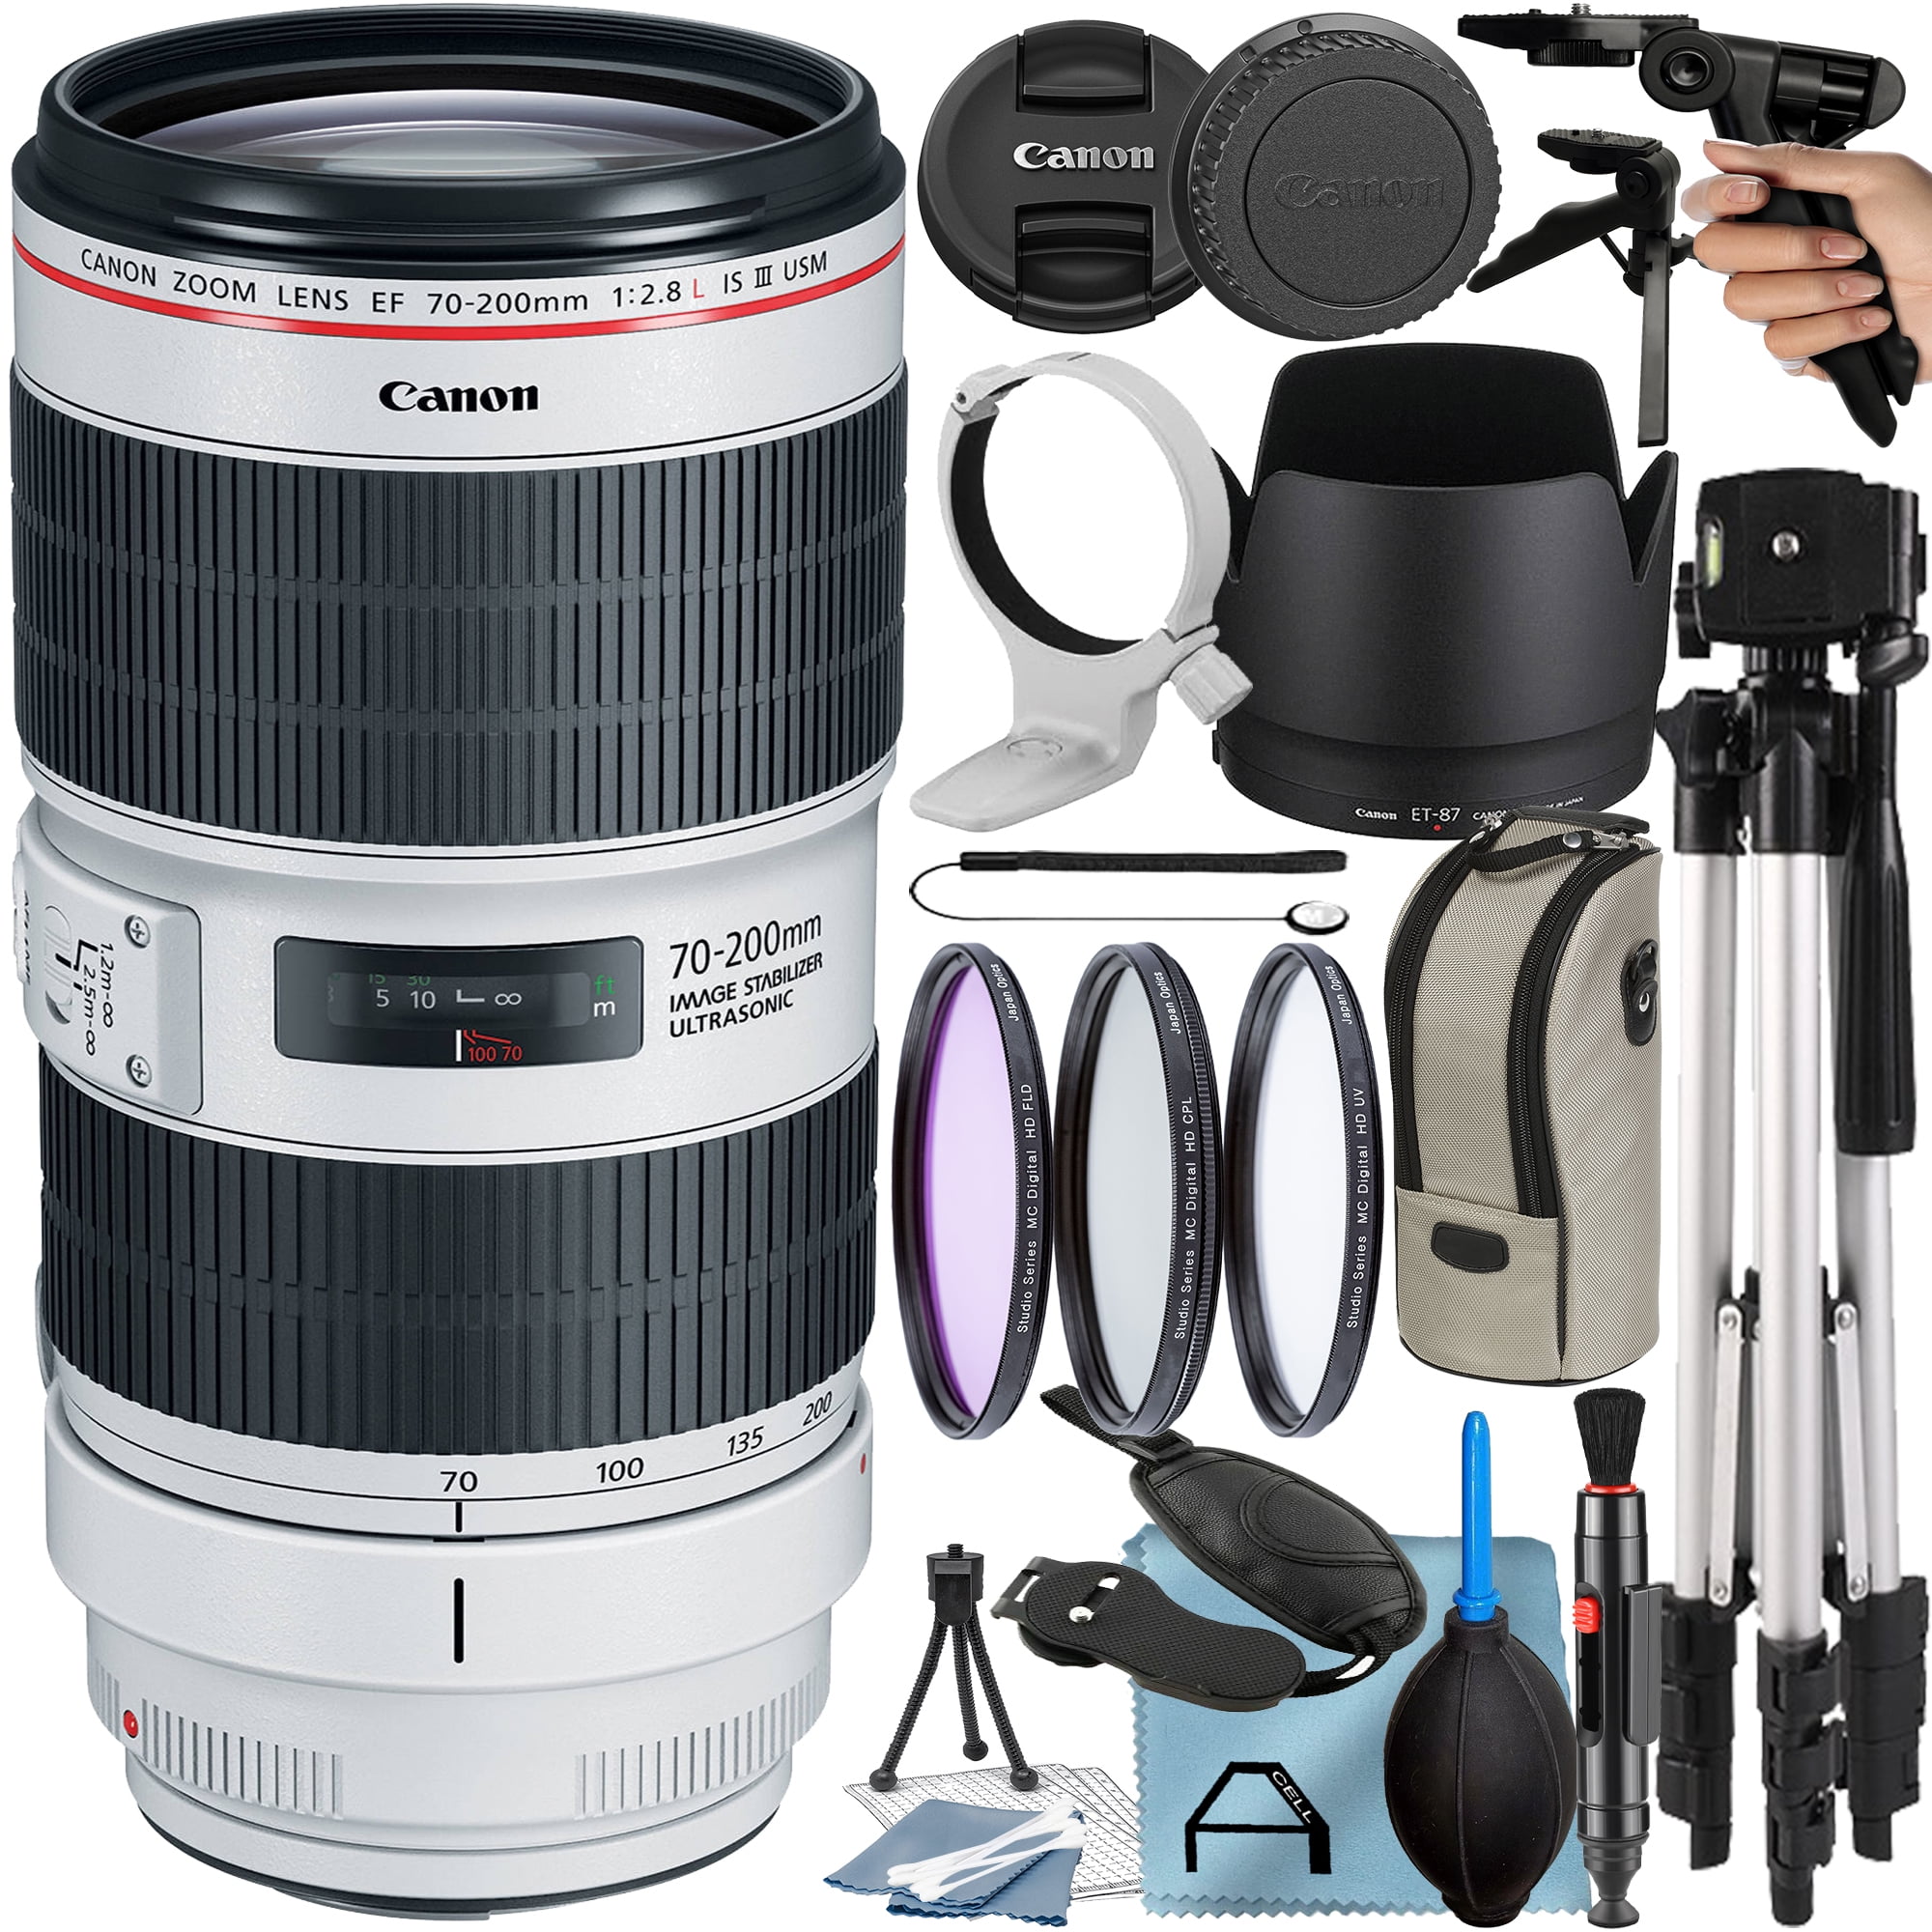 Canon EF 70-200mm f/2.8L IS III USM Lens with Tripod + UV Filter + 